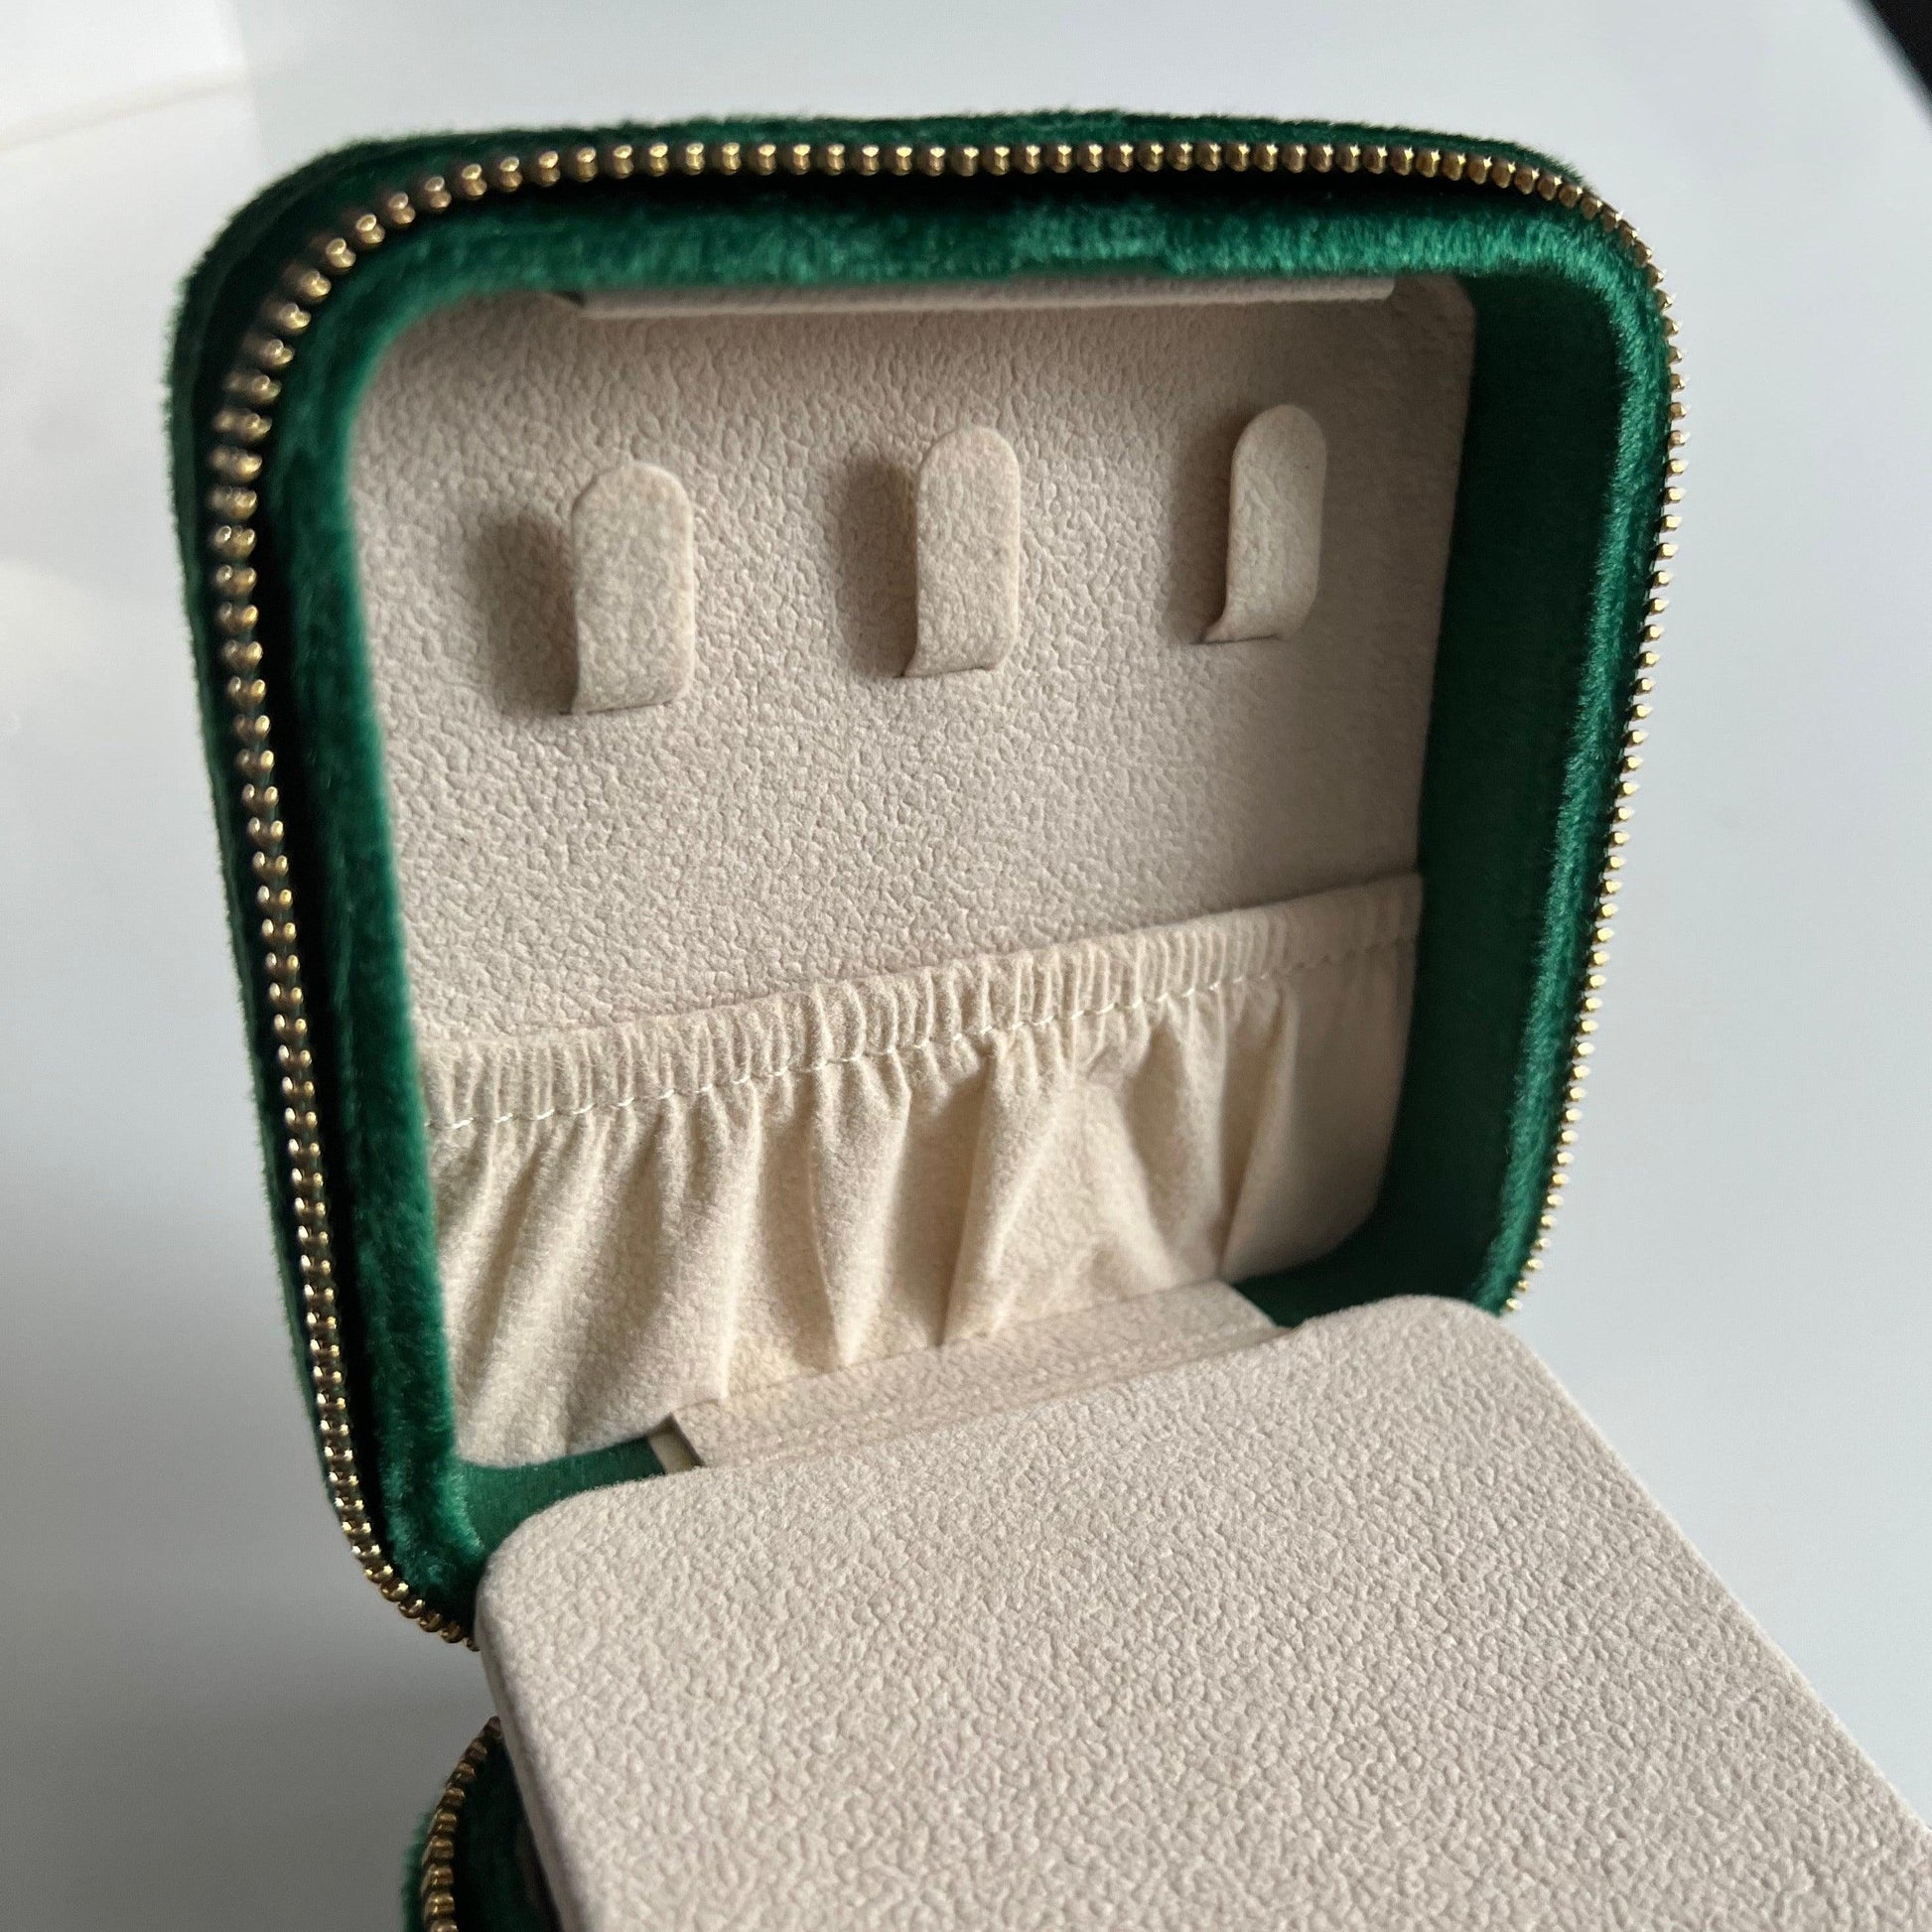 Travel Velvet Jewelry Case - Royal Green - JESSA JEWELRY | GOLD JEWELRY; dainty, affordable gold everyday jewelry. Tarnish free, water-resistant, hypoallergenic. Jewelry for everyday wear